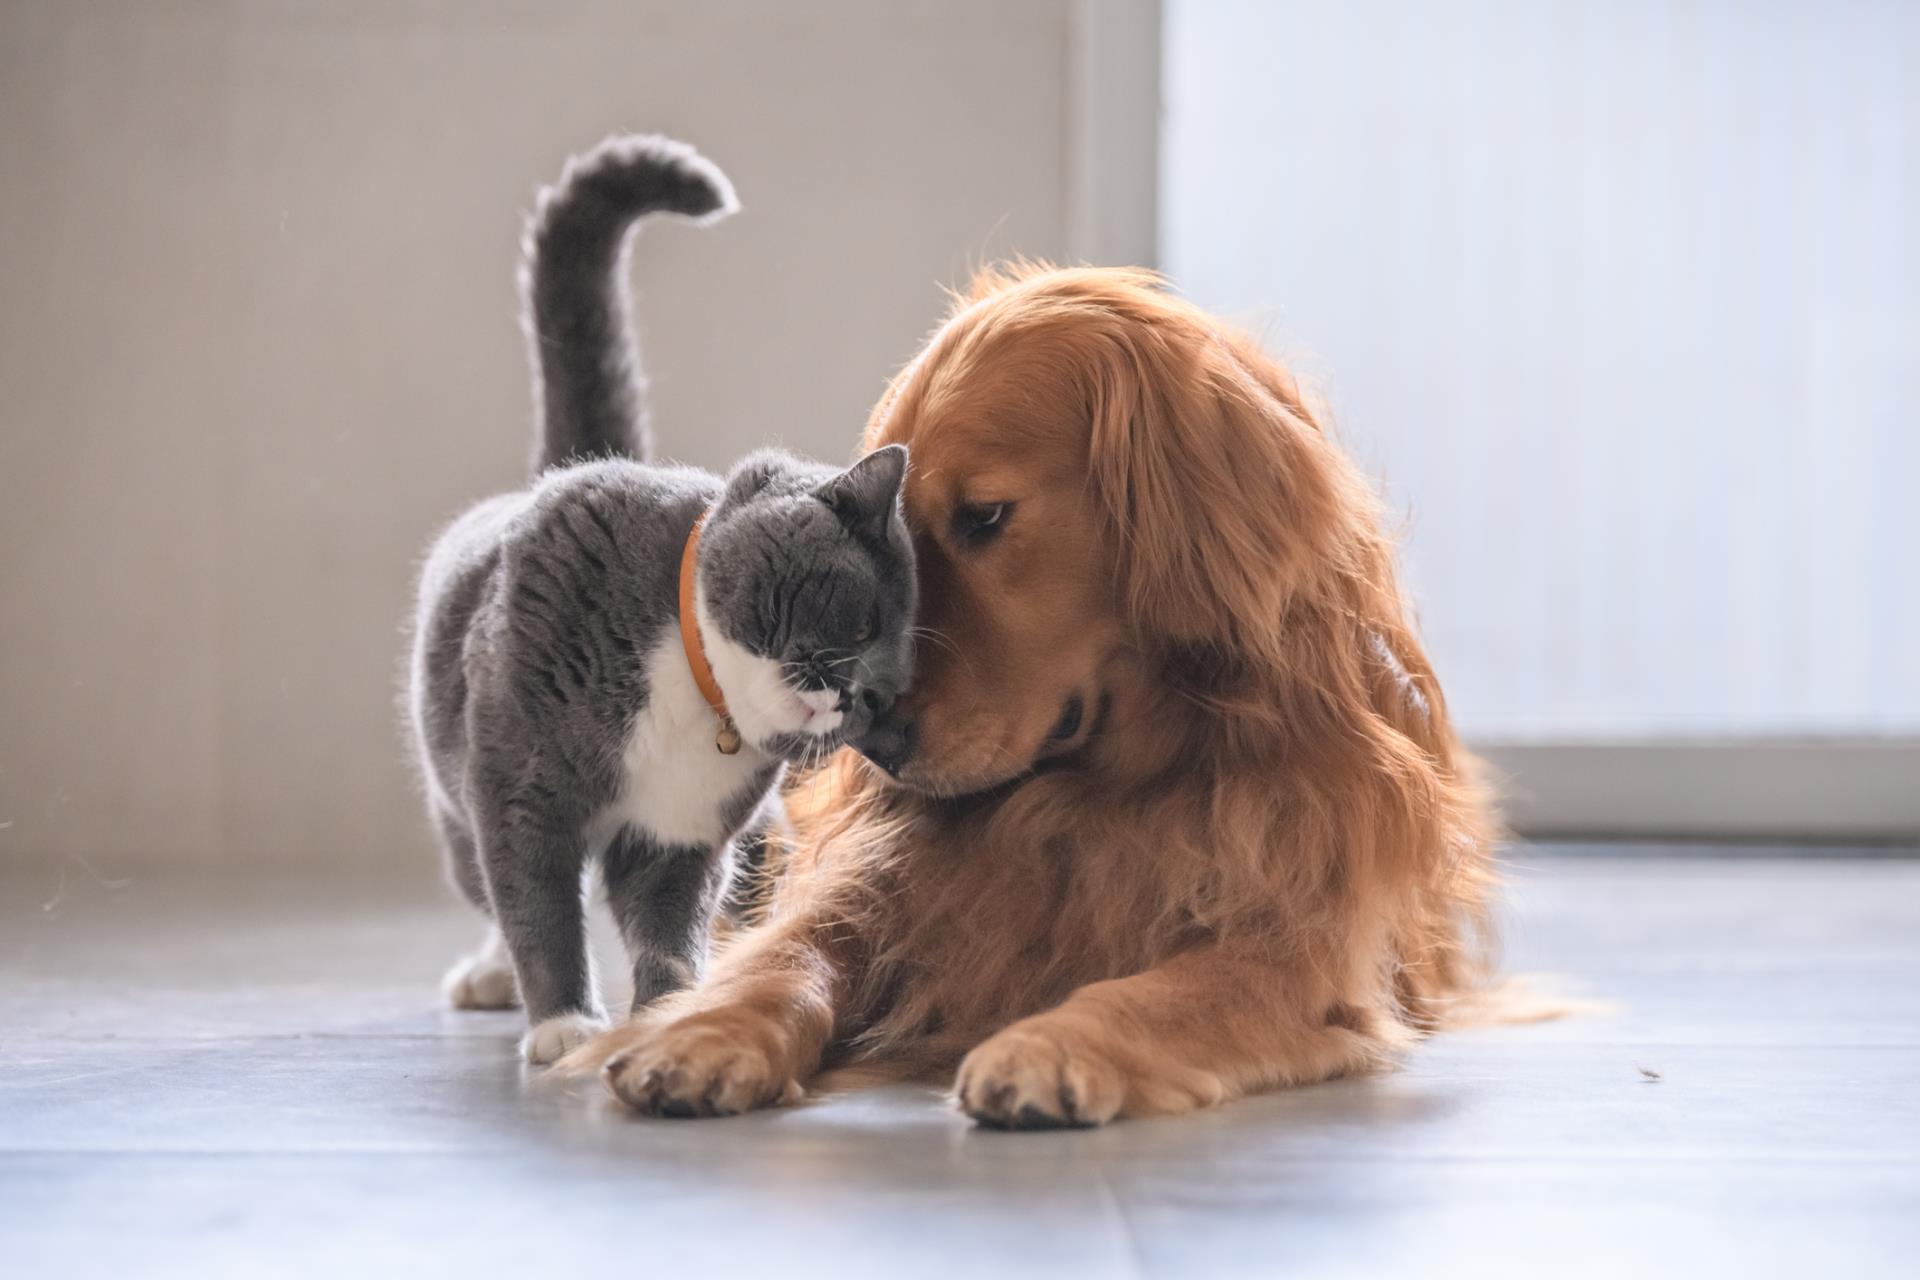 Cats and Dogs Image